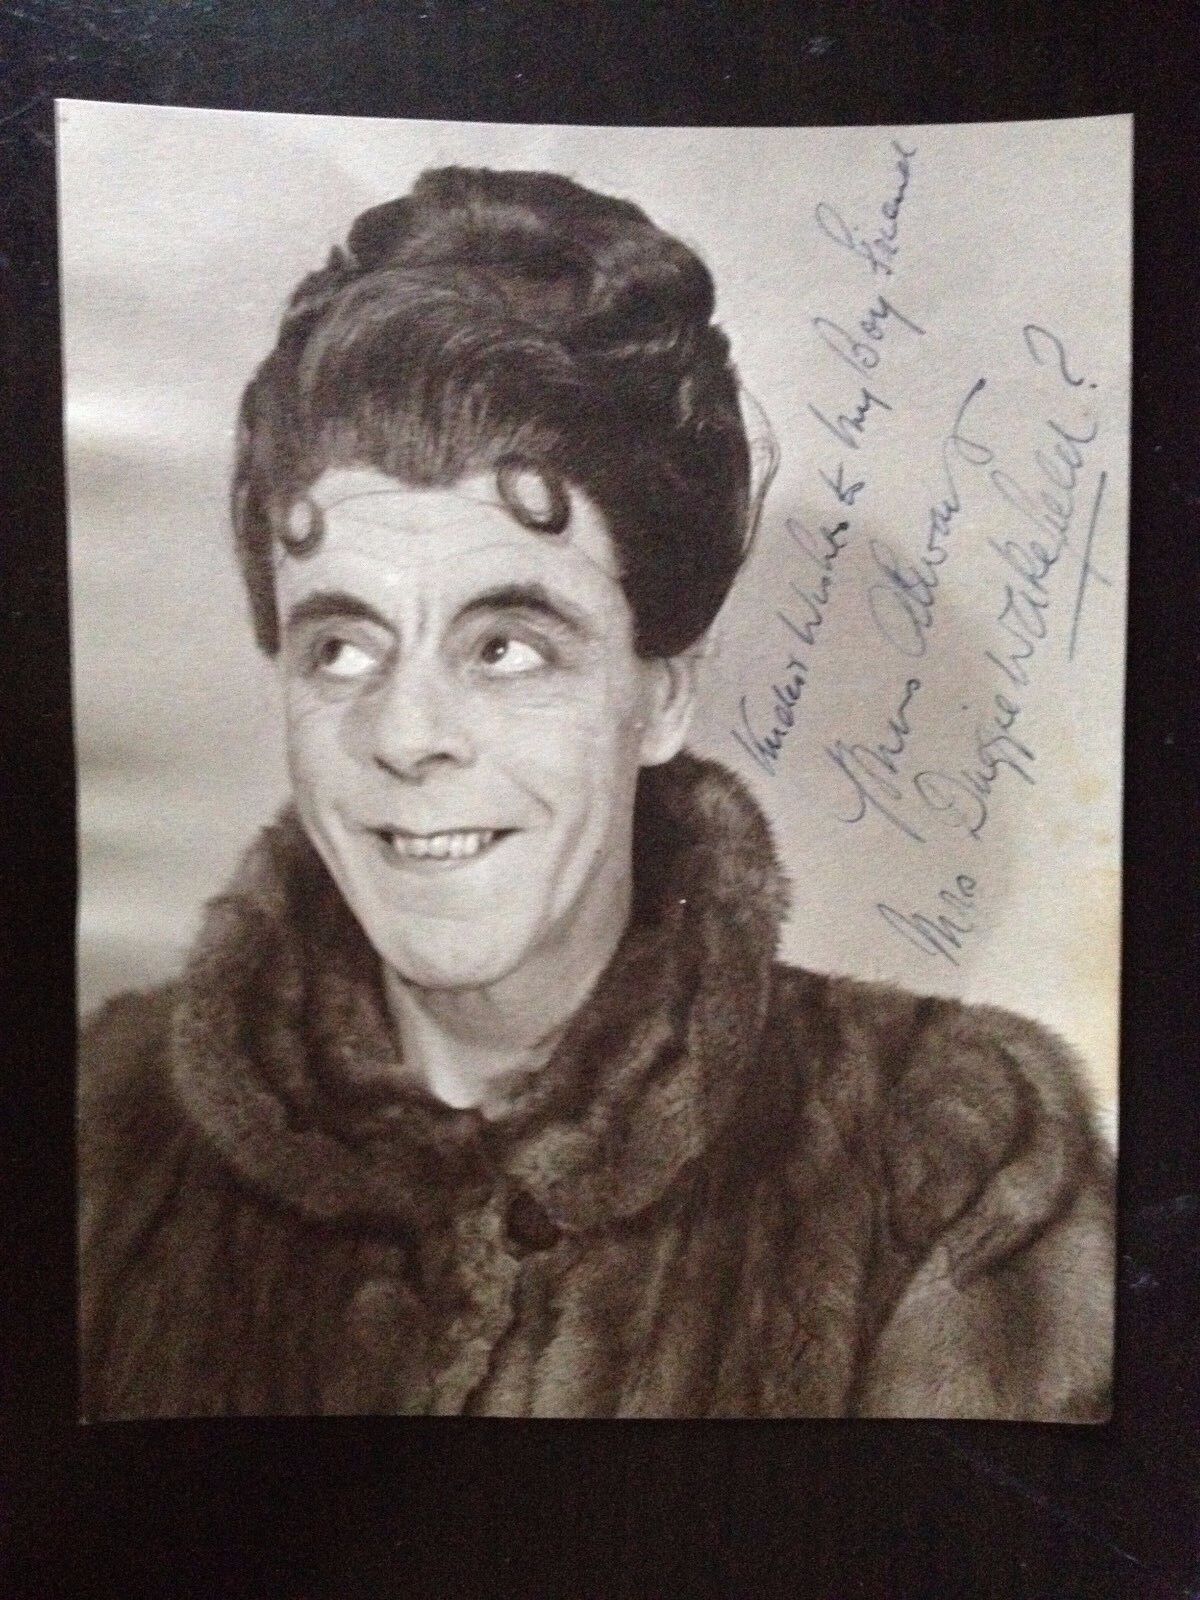 DUGGIE WAKEFIELD - ACTOR AND COMEDY STAR - EXCELLENT SIGNED VINTAGE Photo Poster paintingGRAPH